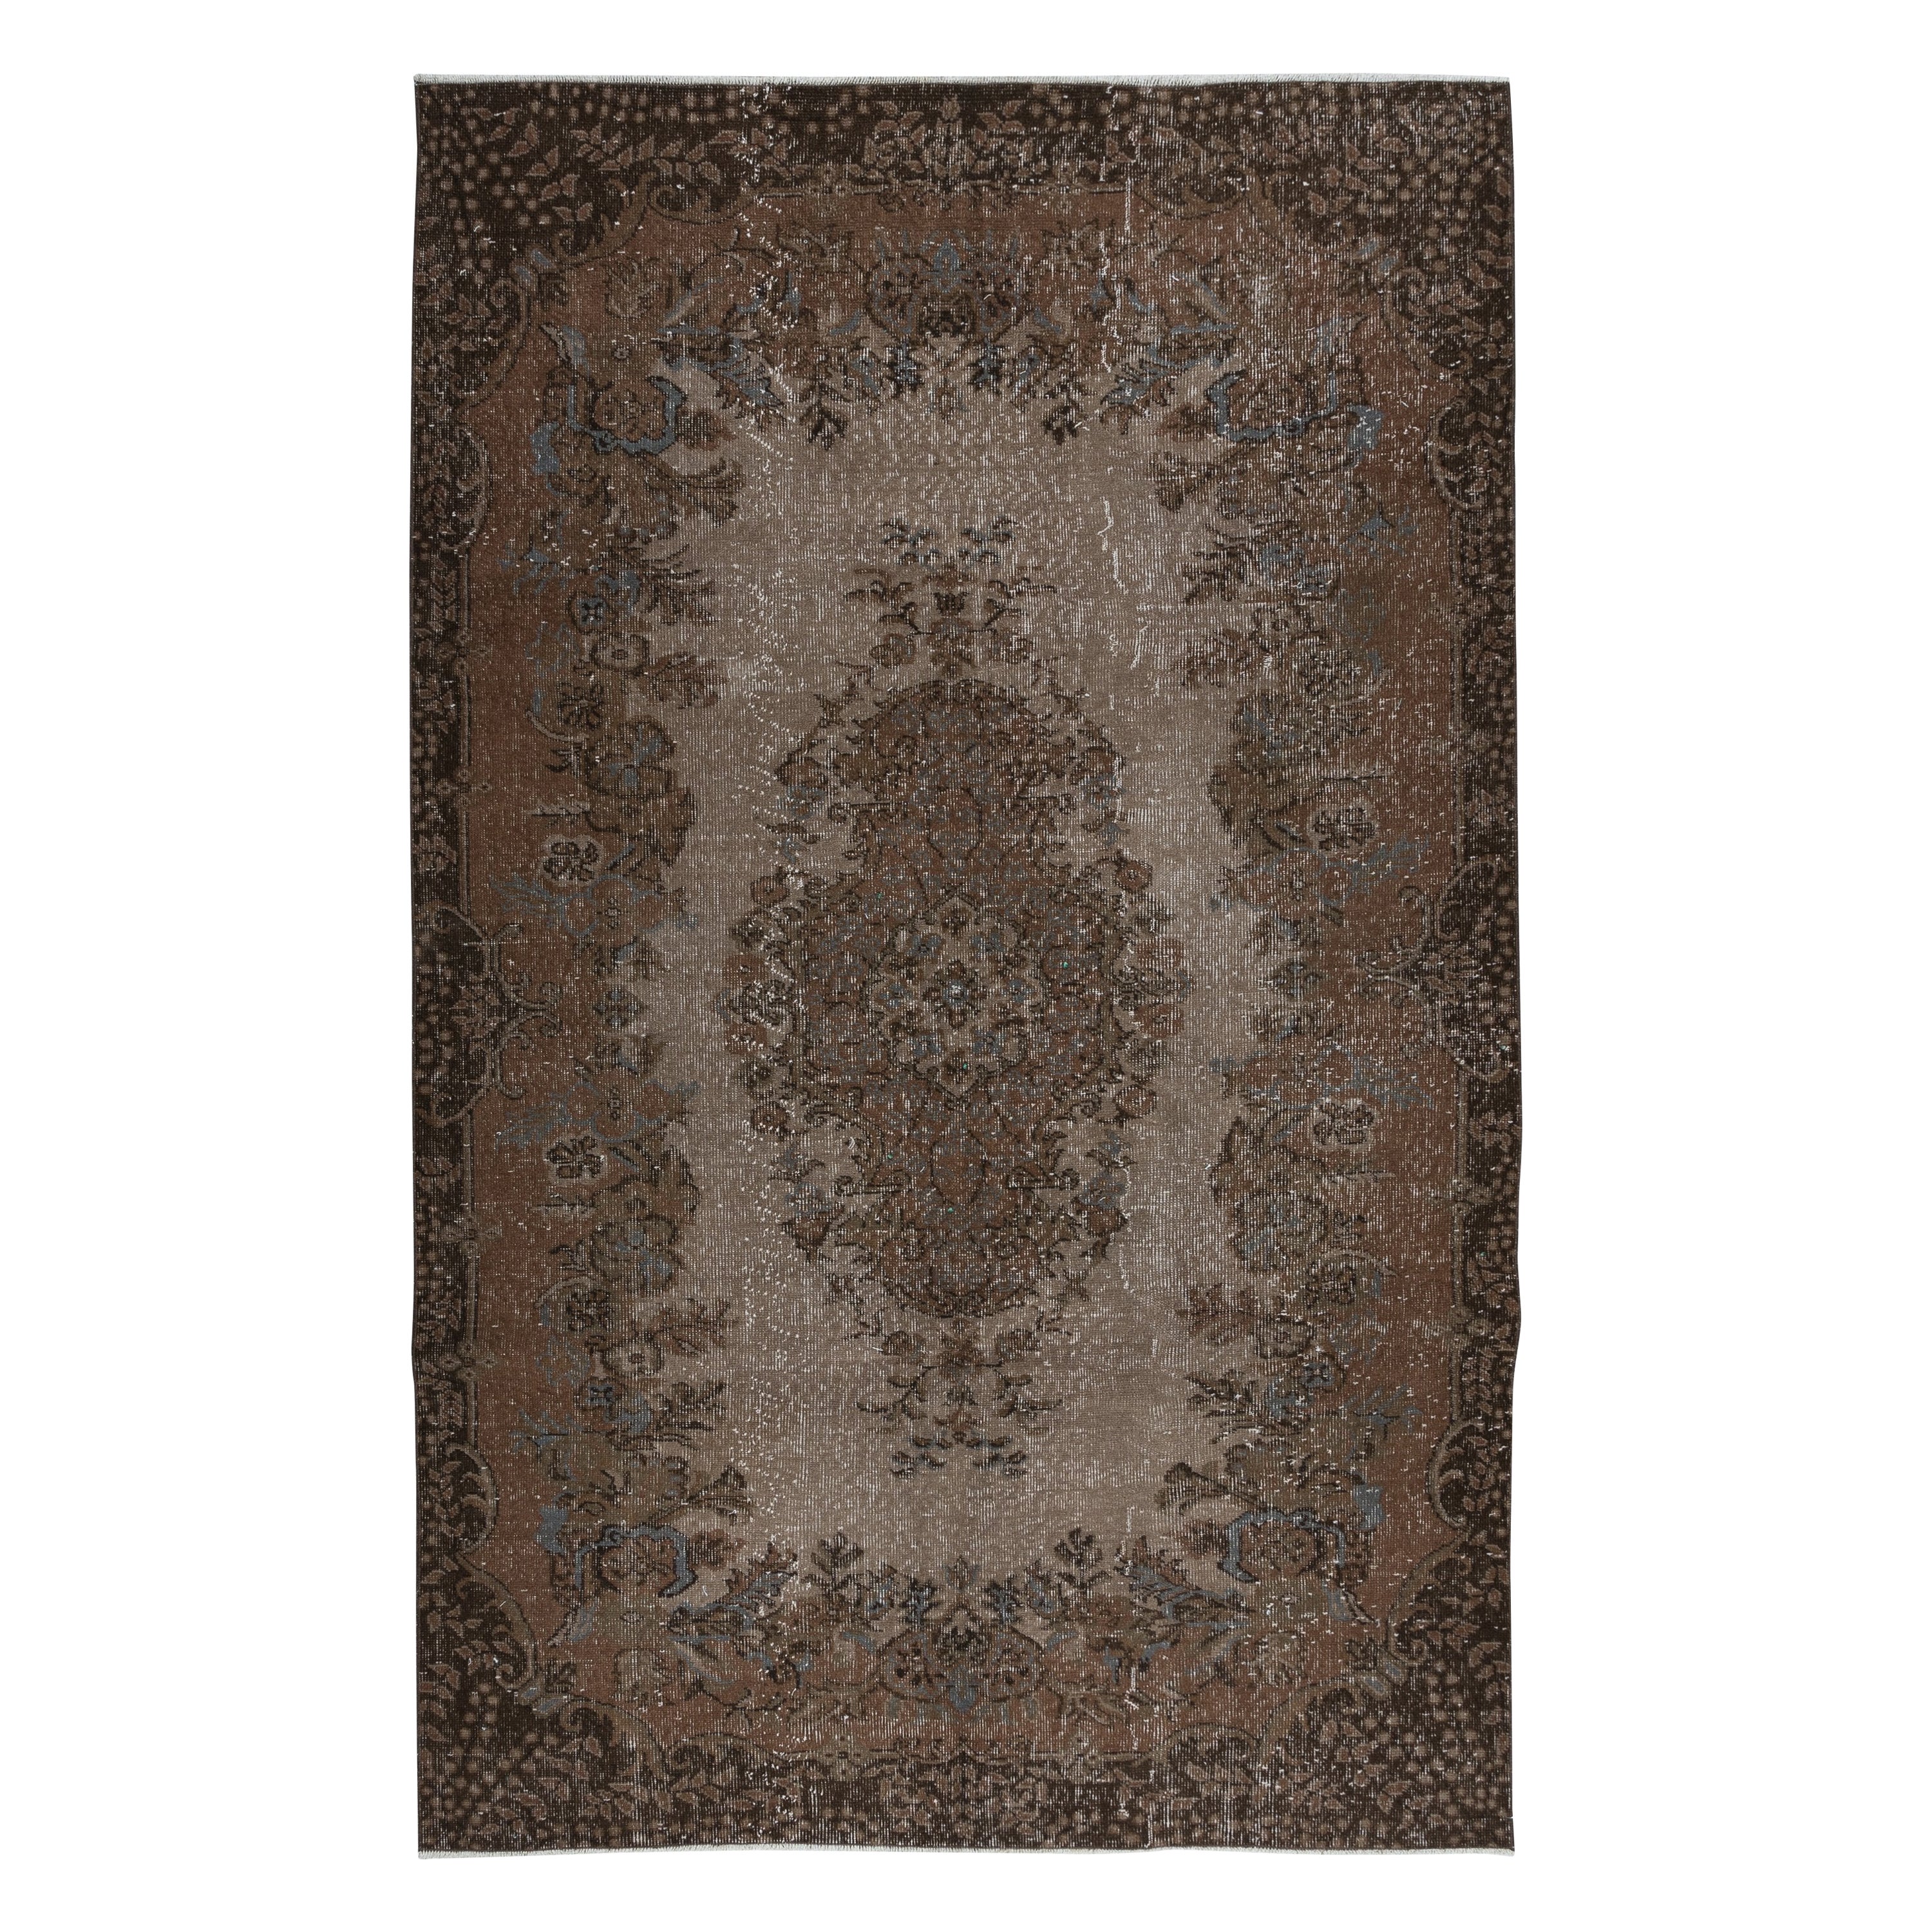 5.4x8.7 Ft Rustic Turkish Area Rug, Brown Handmade Contemporary Carpet For Sale